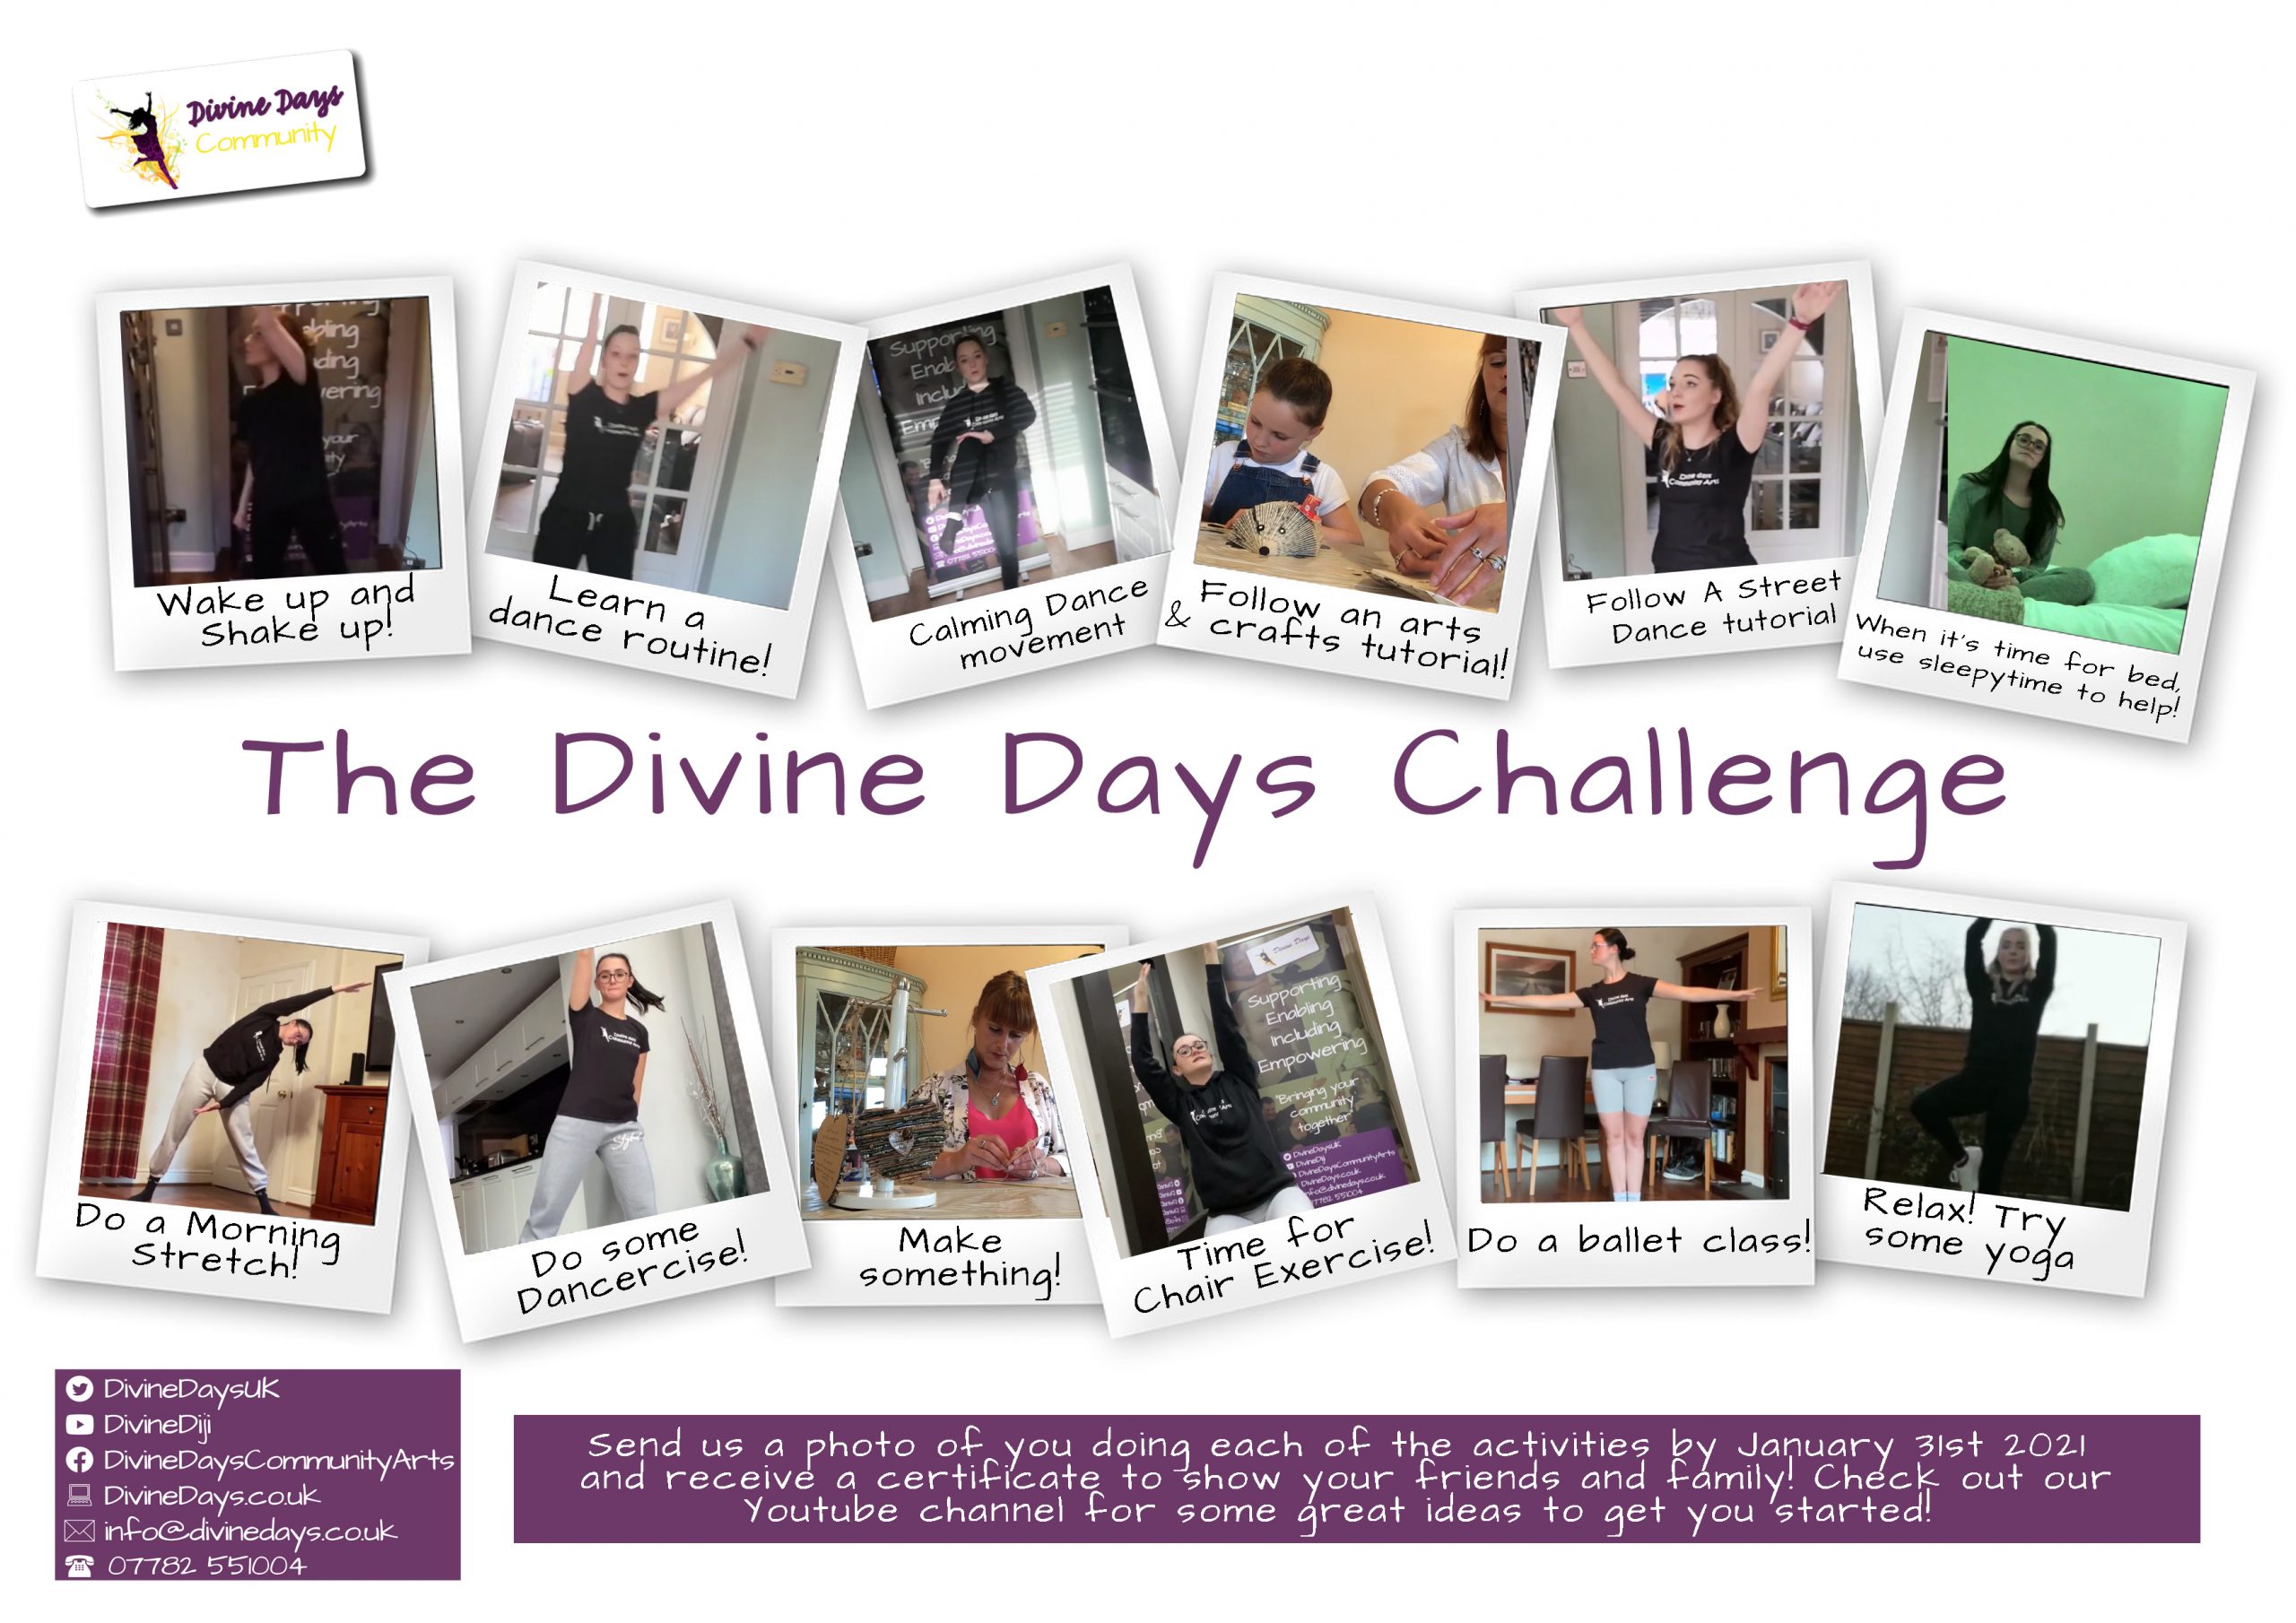 Divine Days Challenge! Wake up and shake up Learn a dance routine calming dance movement follow an arts & crafts tutorial follow a street dance tutorial when its time for bed use sleepy time for help Do a morning stretch Do some Dancercise Make something Time for chair exercise Do a ballet class Relax and try some Yoga Send us a photo of you doing each of the activities by January 31st 2021 and receive a certificate to show your friends and family! check out our youtube channel for some great ideas to get you started!